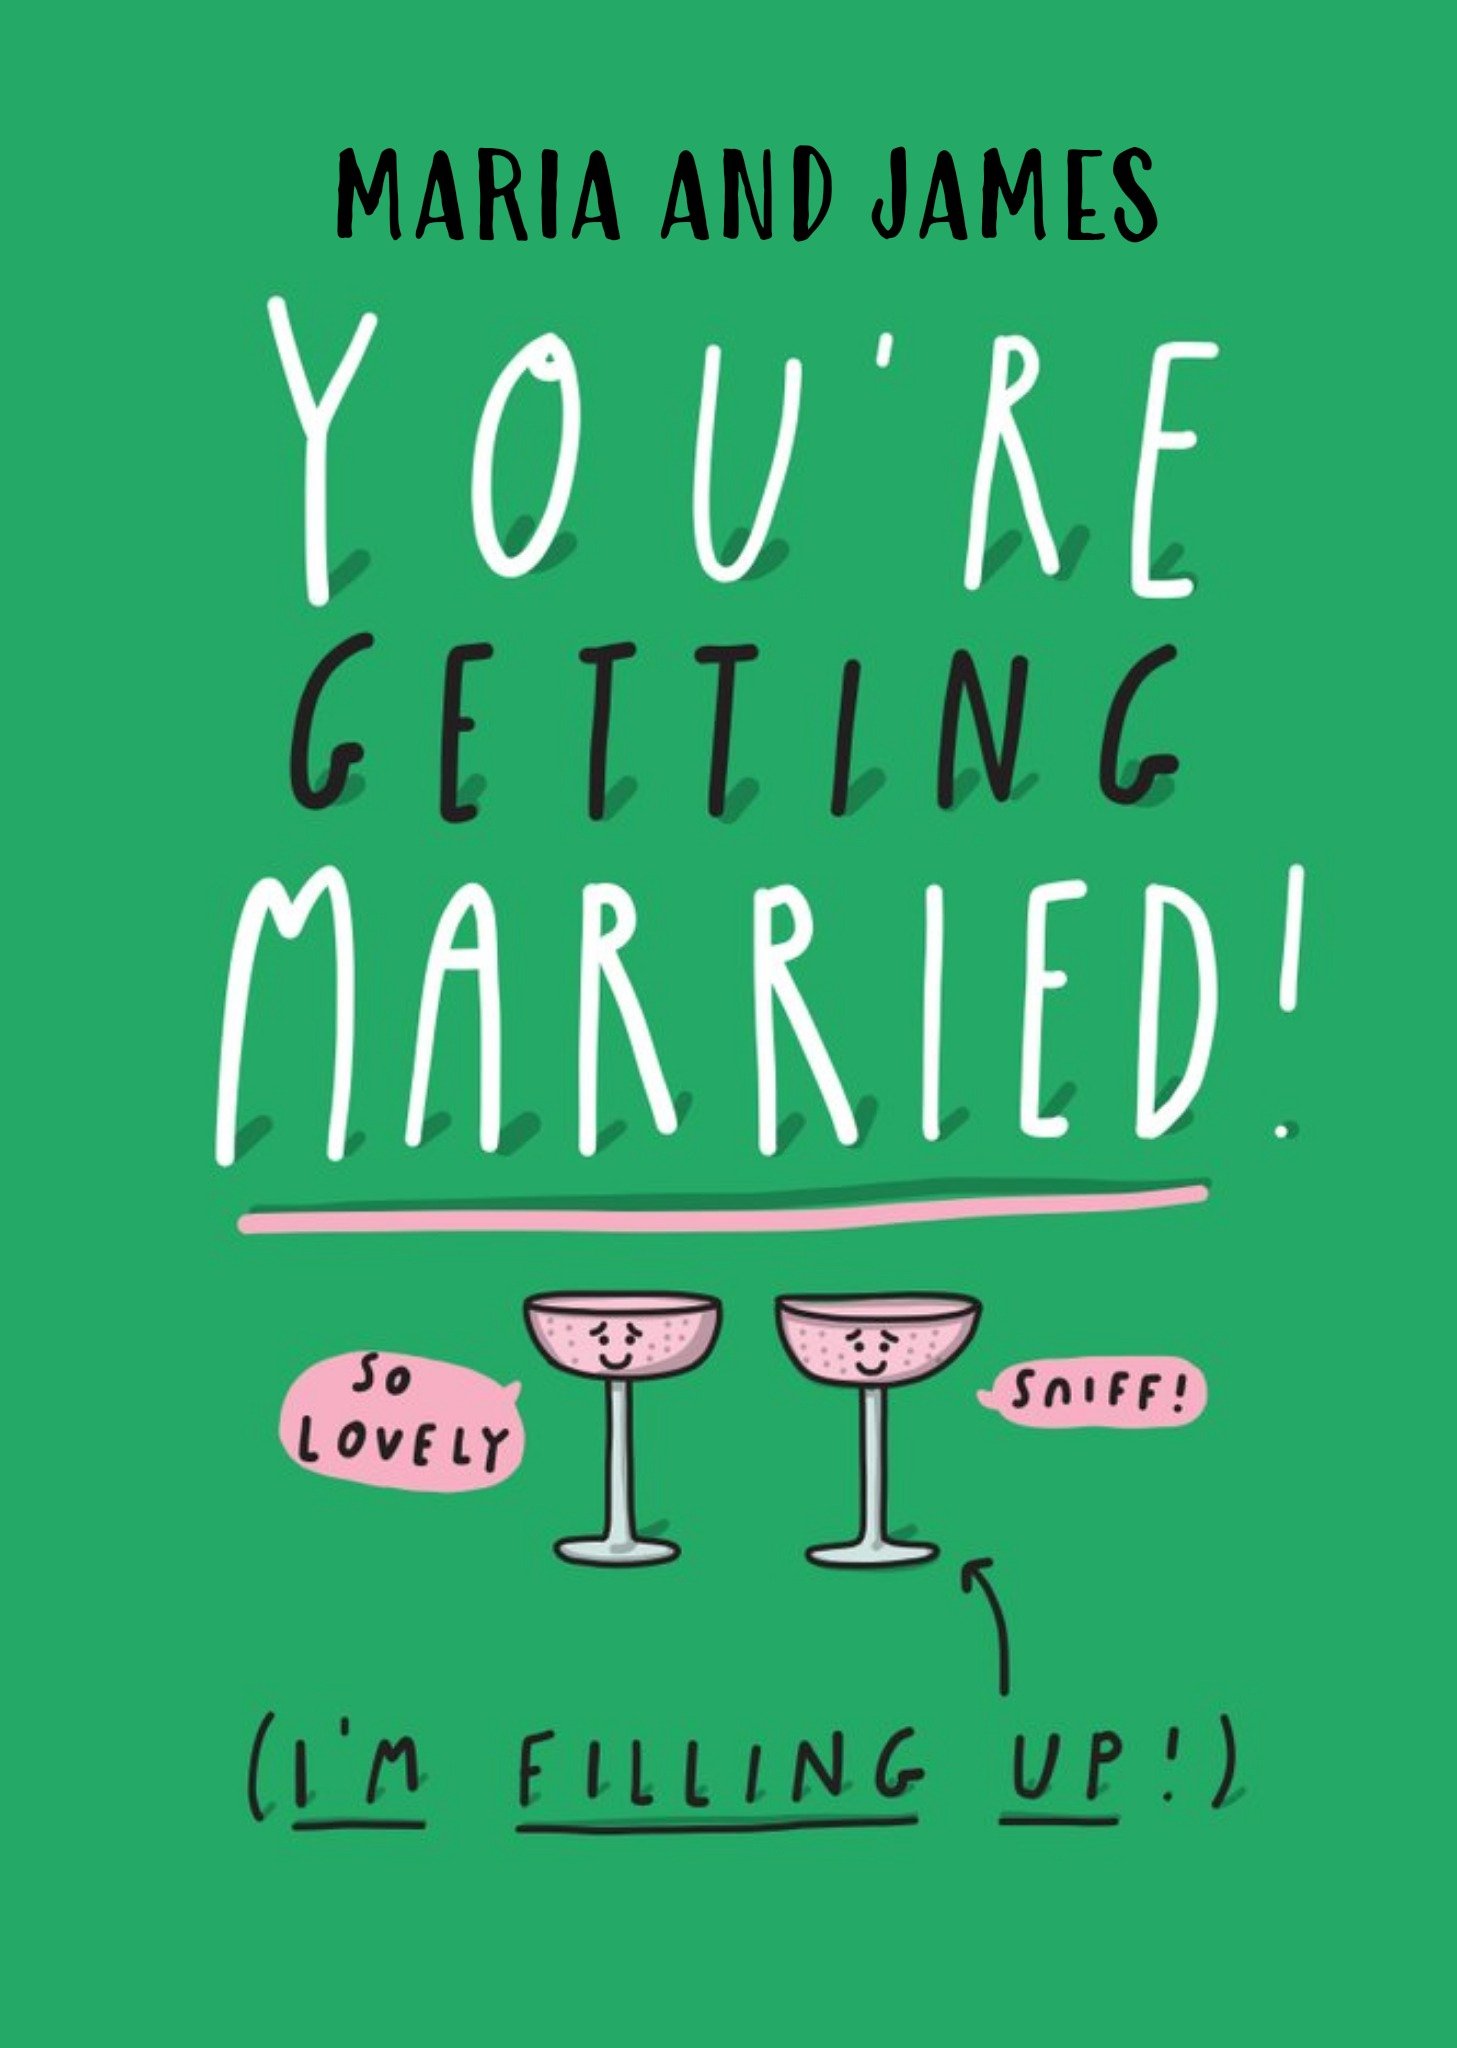 Moonpig Humorous Cartoon Funny Wedding Card You're Getting Married I'm Filling Up (The Champagne Sau